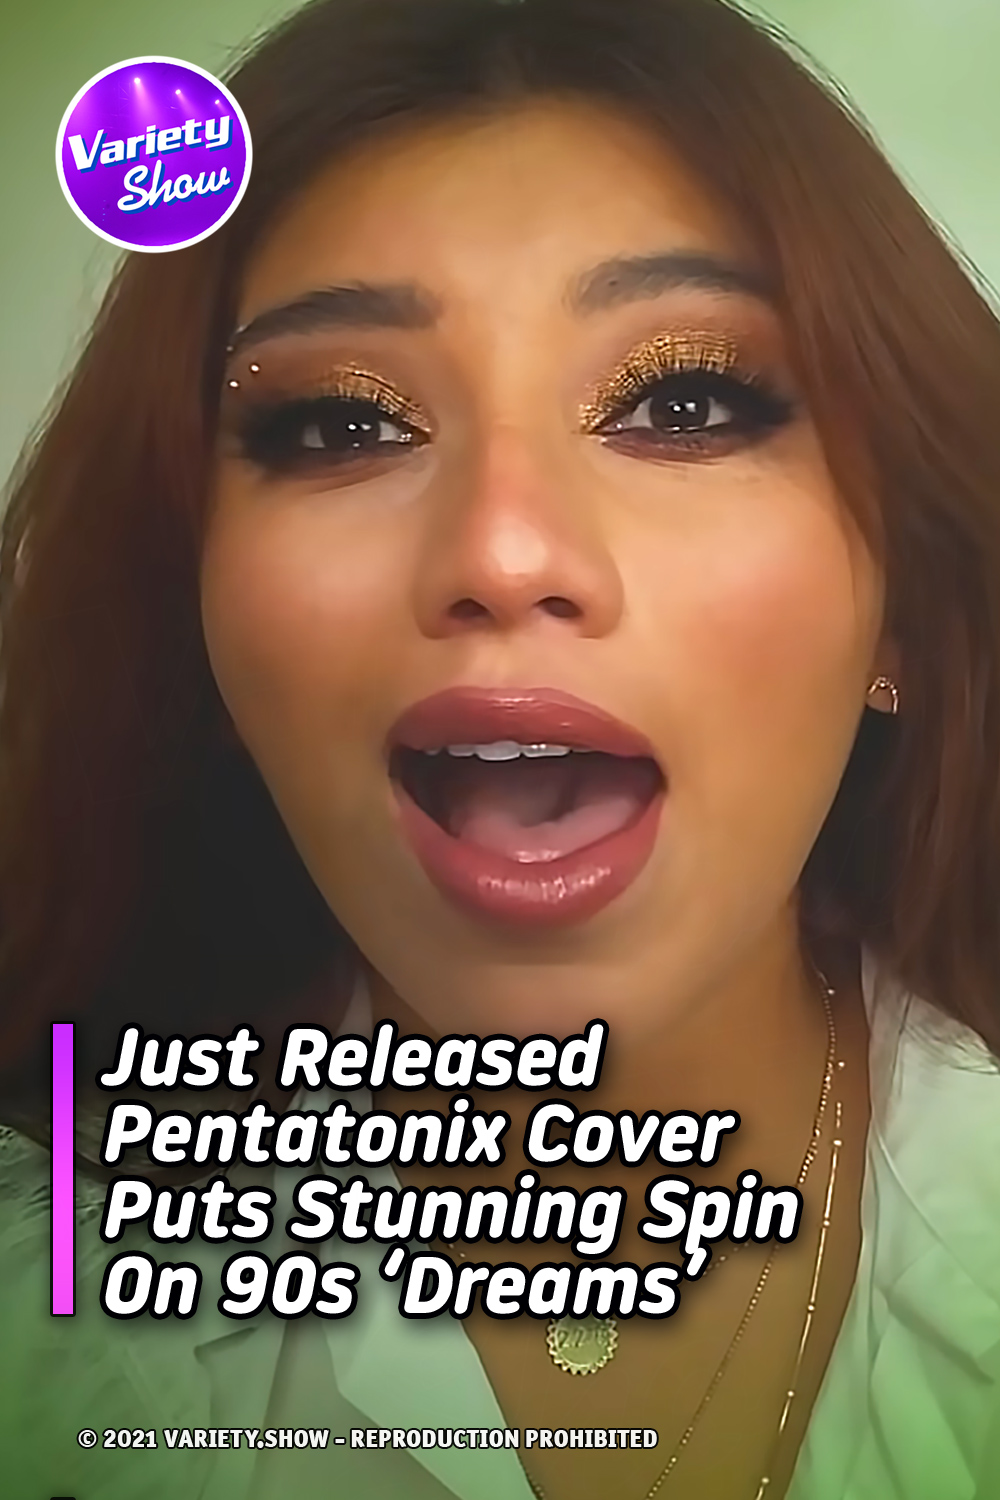 Just Released Pentatonix Cover Puts Stunning Spin On 90s ‘Dreams’